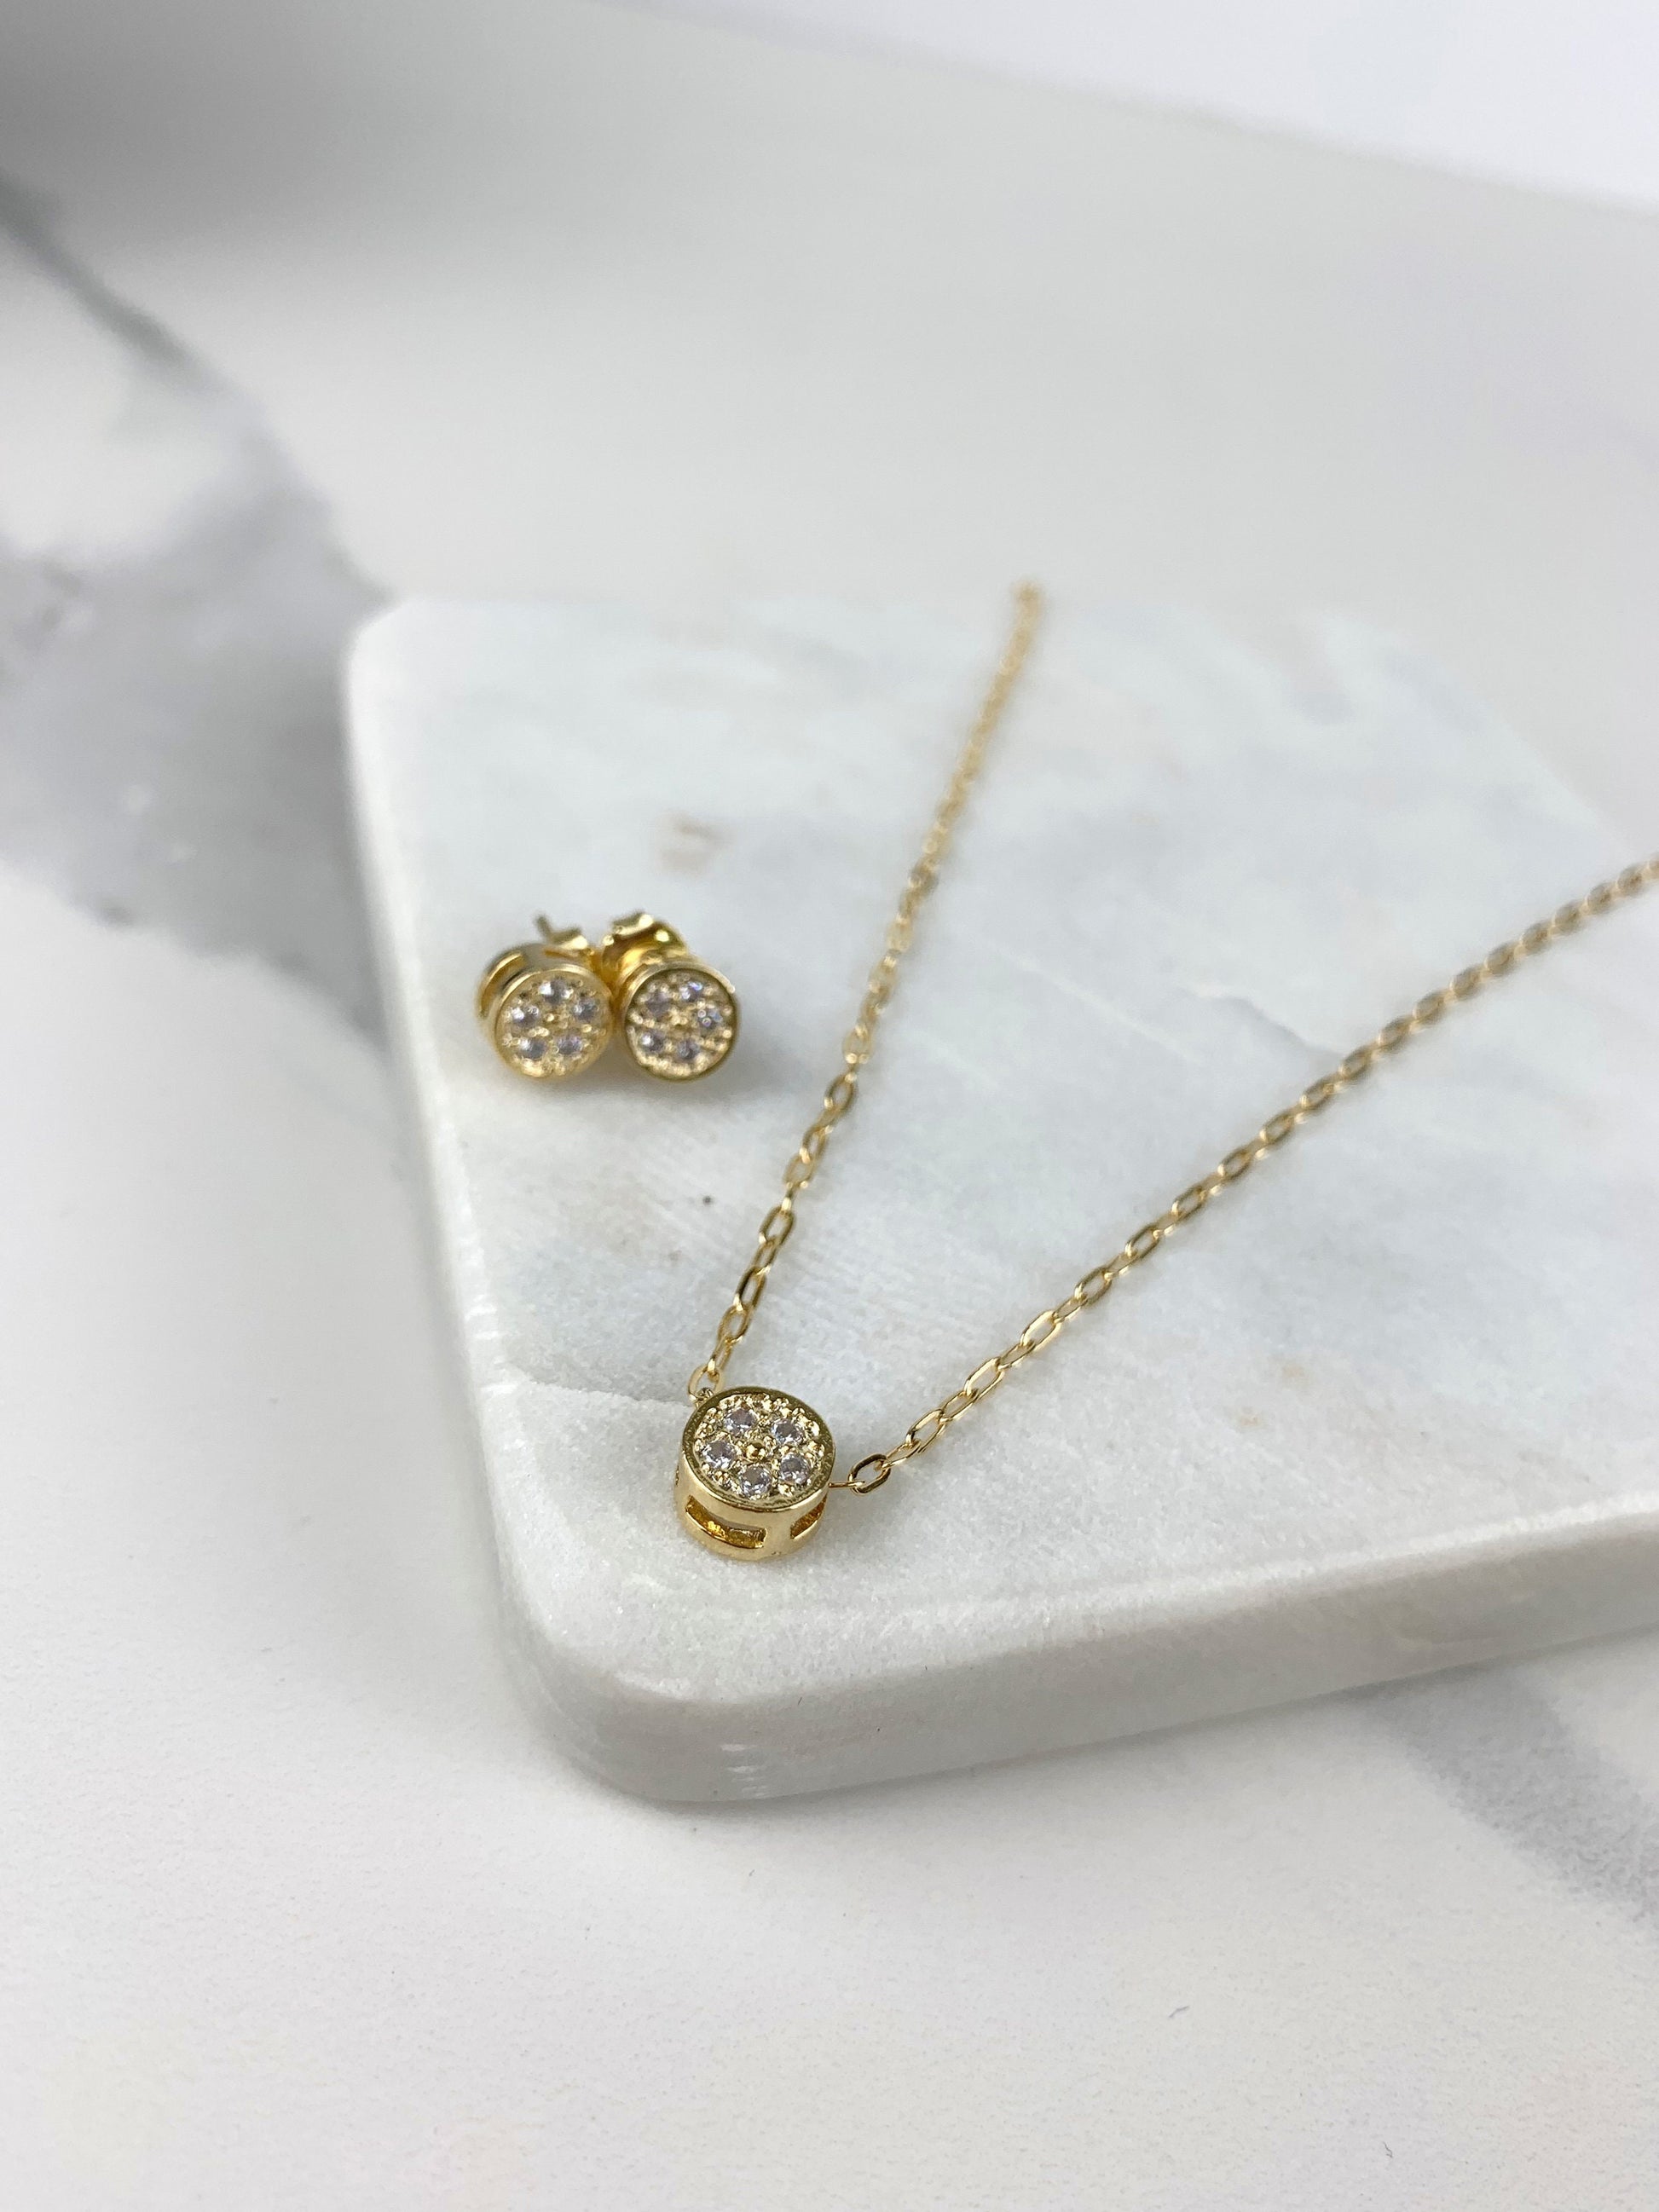 18k Gold Filled Fancy 1mm Cutie circle with CZ Cubic Zirconia Necklace and Earrings Wholesale Jewelry Supplies